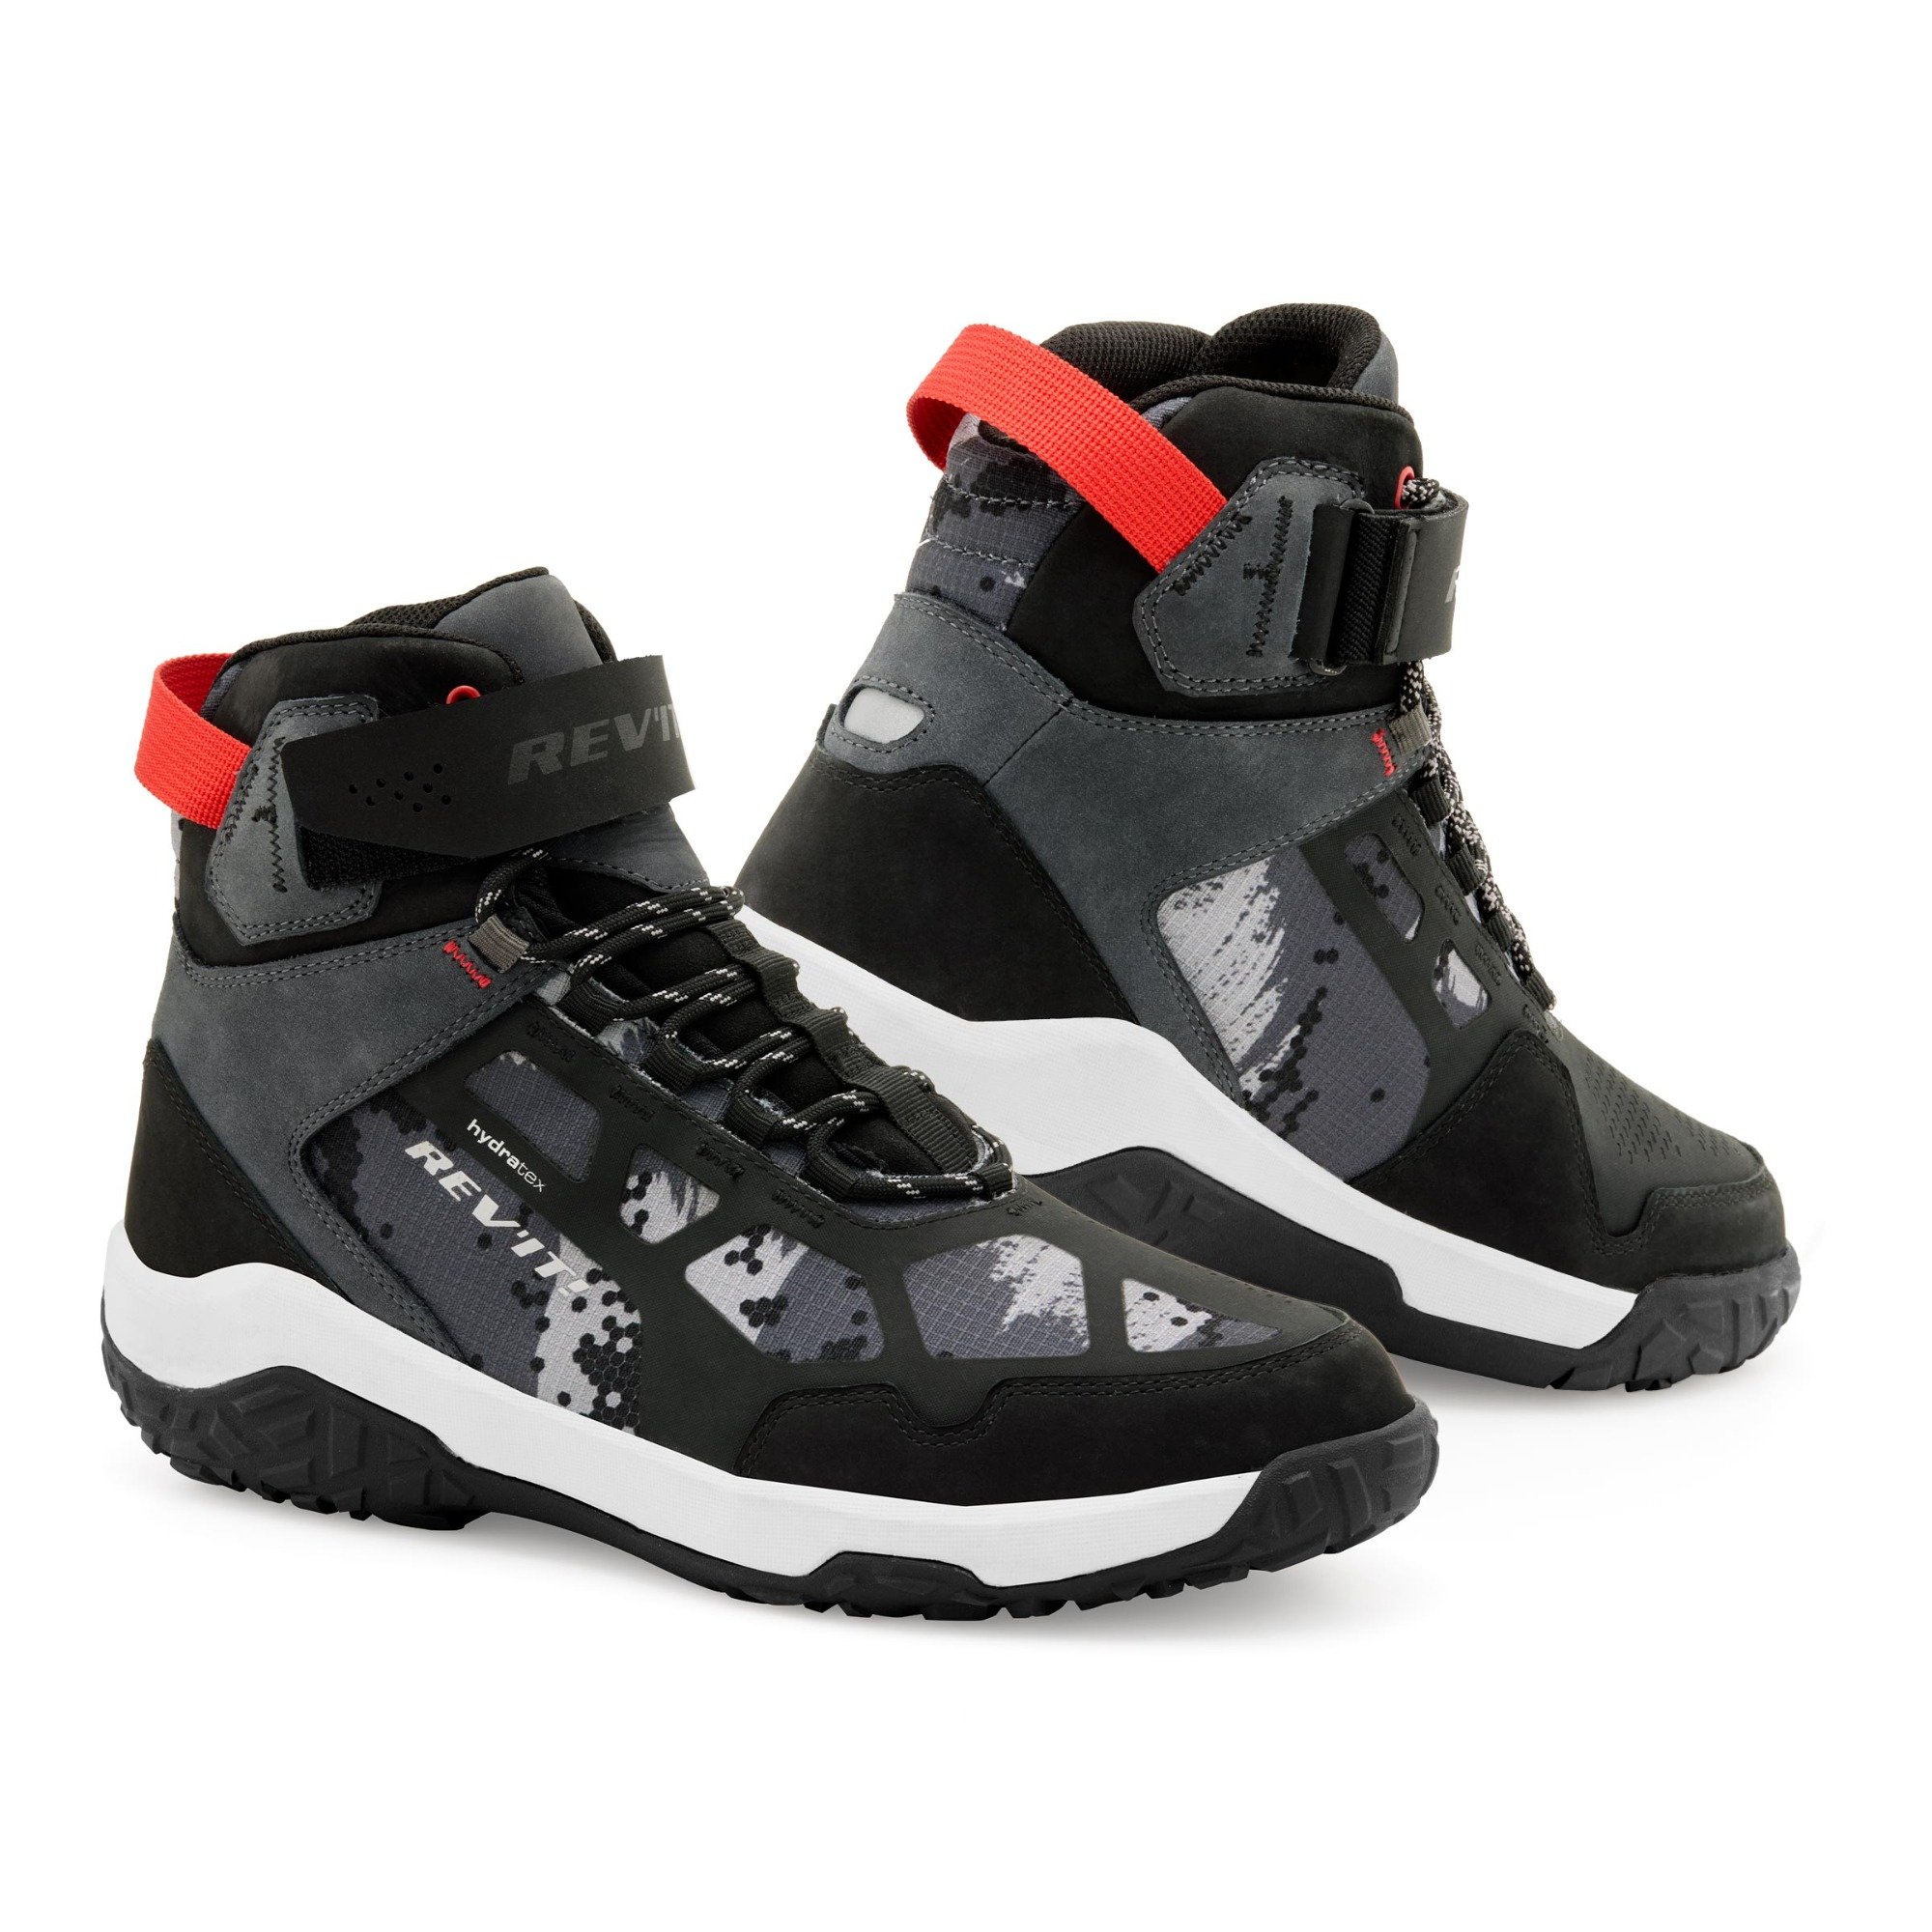 Image of REV'IT! Shoes Descent H2O Black Red Talla 40